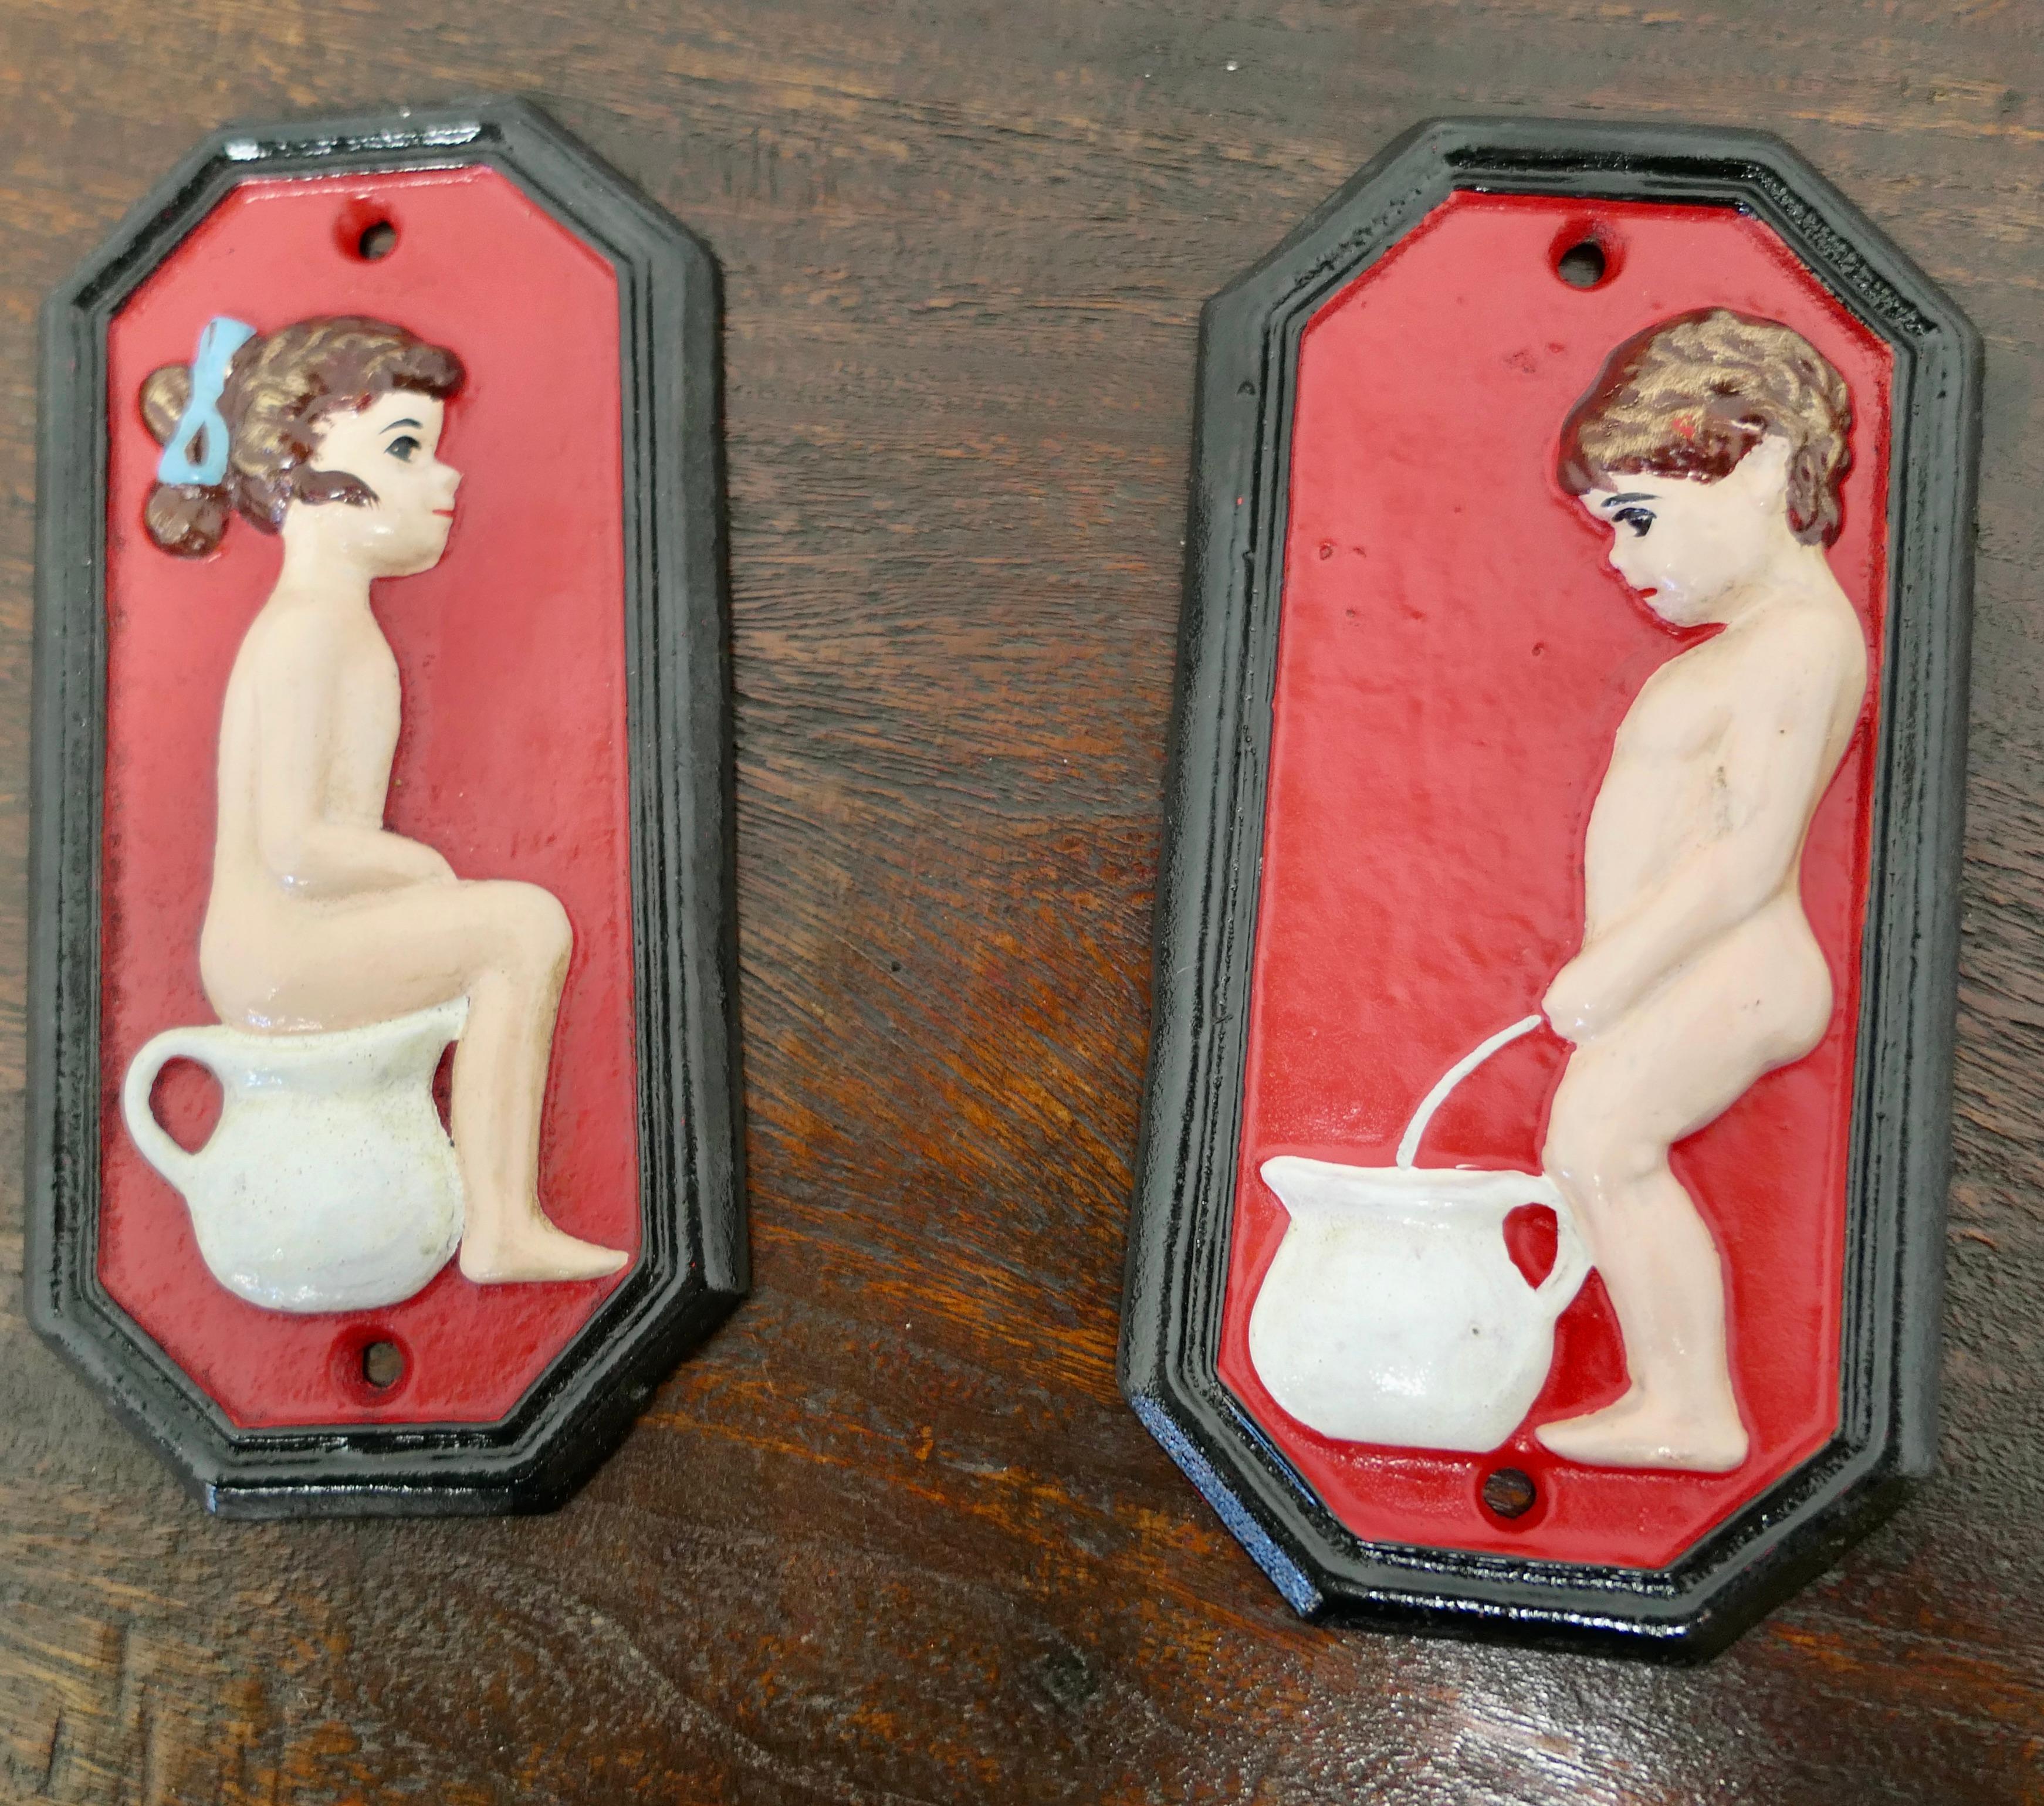 A charming pair of male and female Toilet Signs

Ladies and Gentlemen, Boys and Girls no home should be without these, painted Cast iron Loo signs 

The signs are 7” high, 3.5” wide and 1” thick, painted in bright red with very little